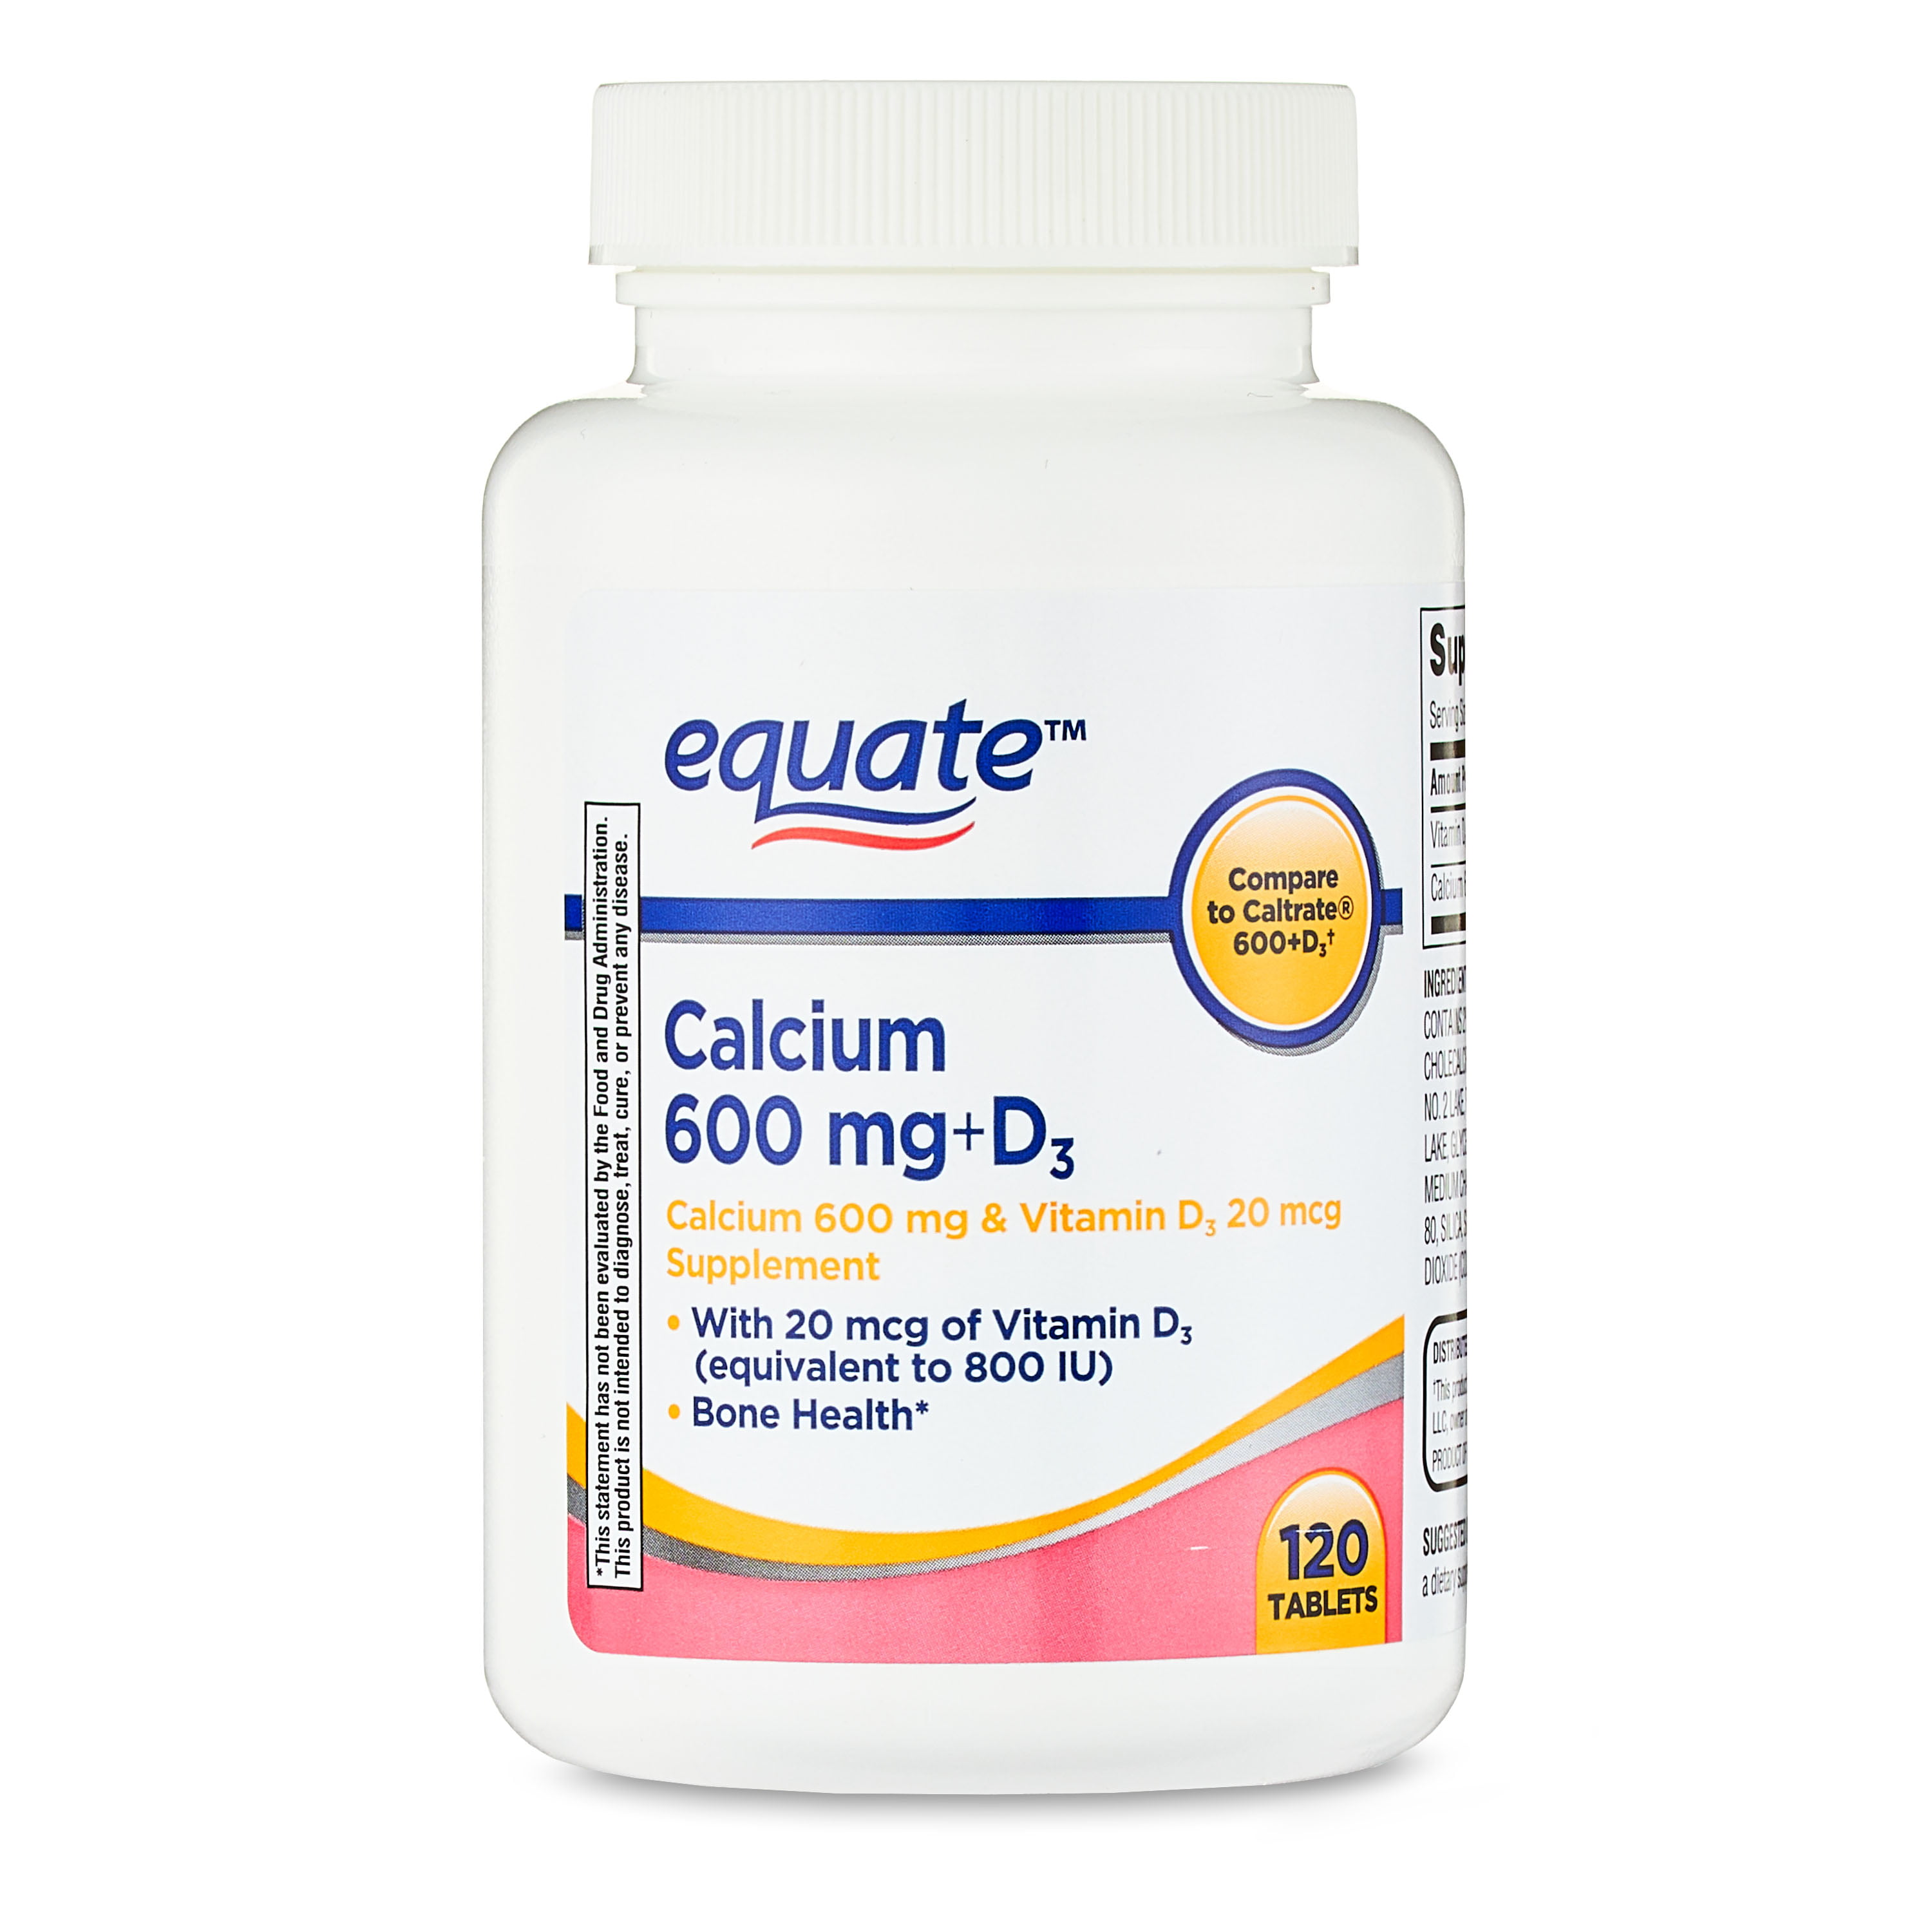 Equate Calcium + D3 Tablets Dietary Supplement, 600 mg, 120 Count